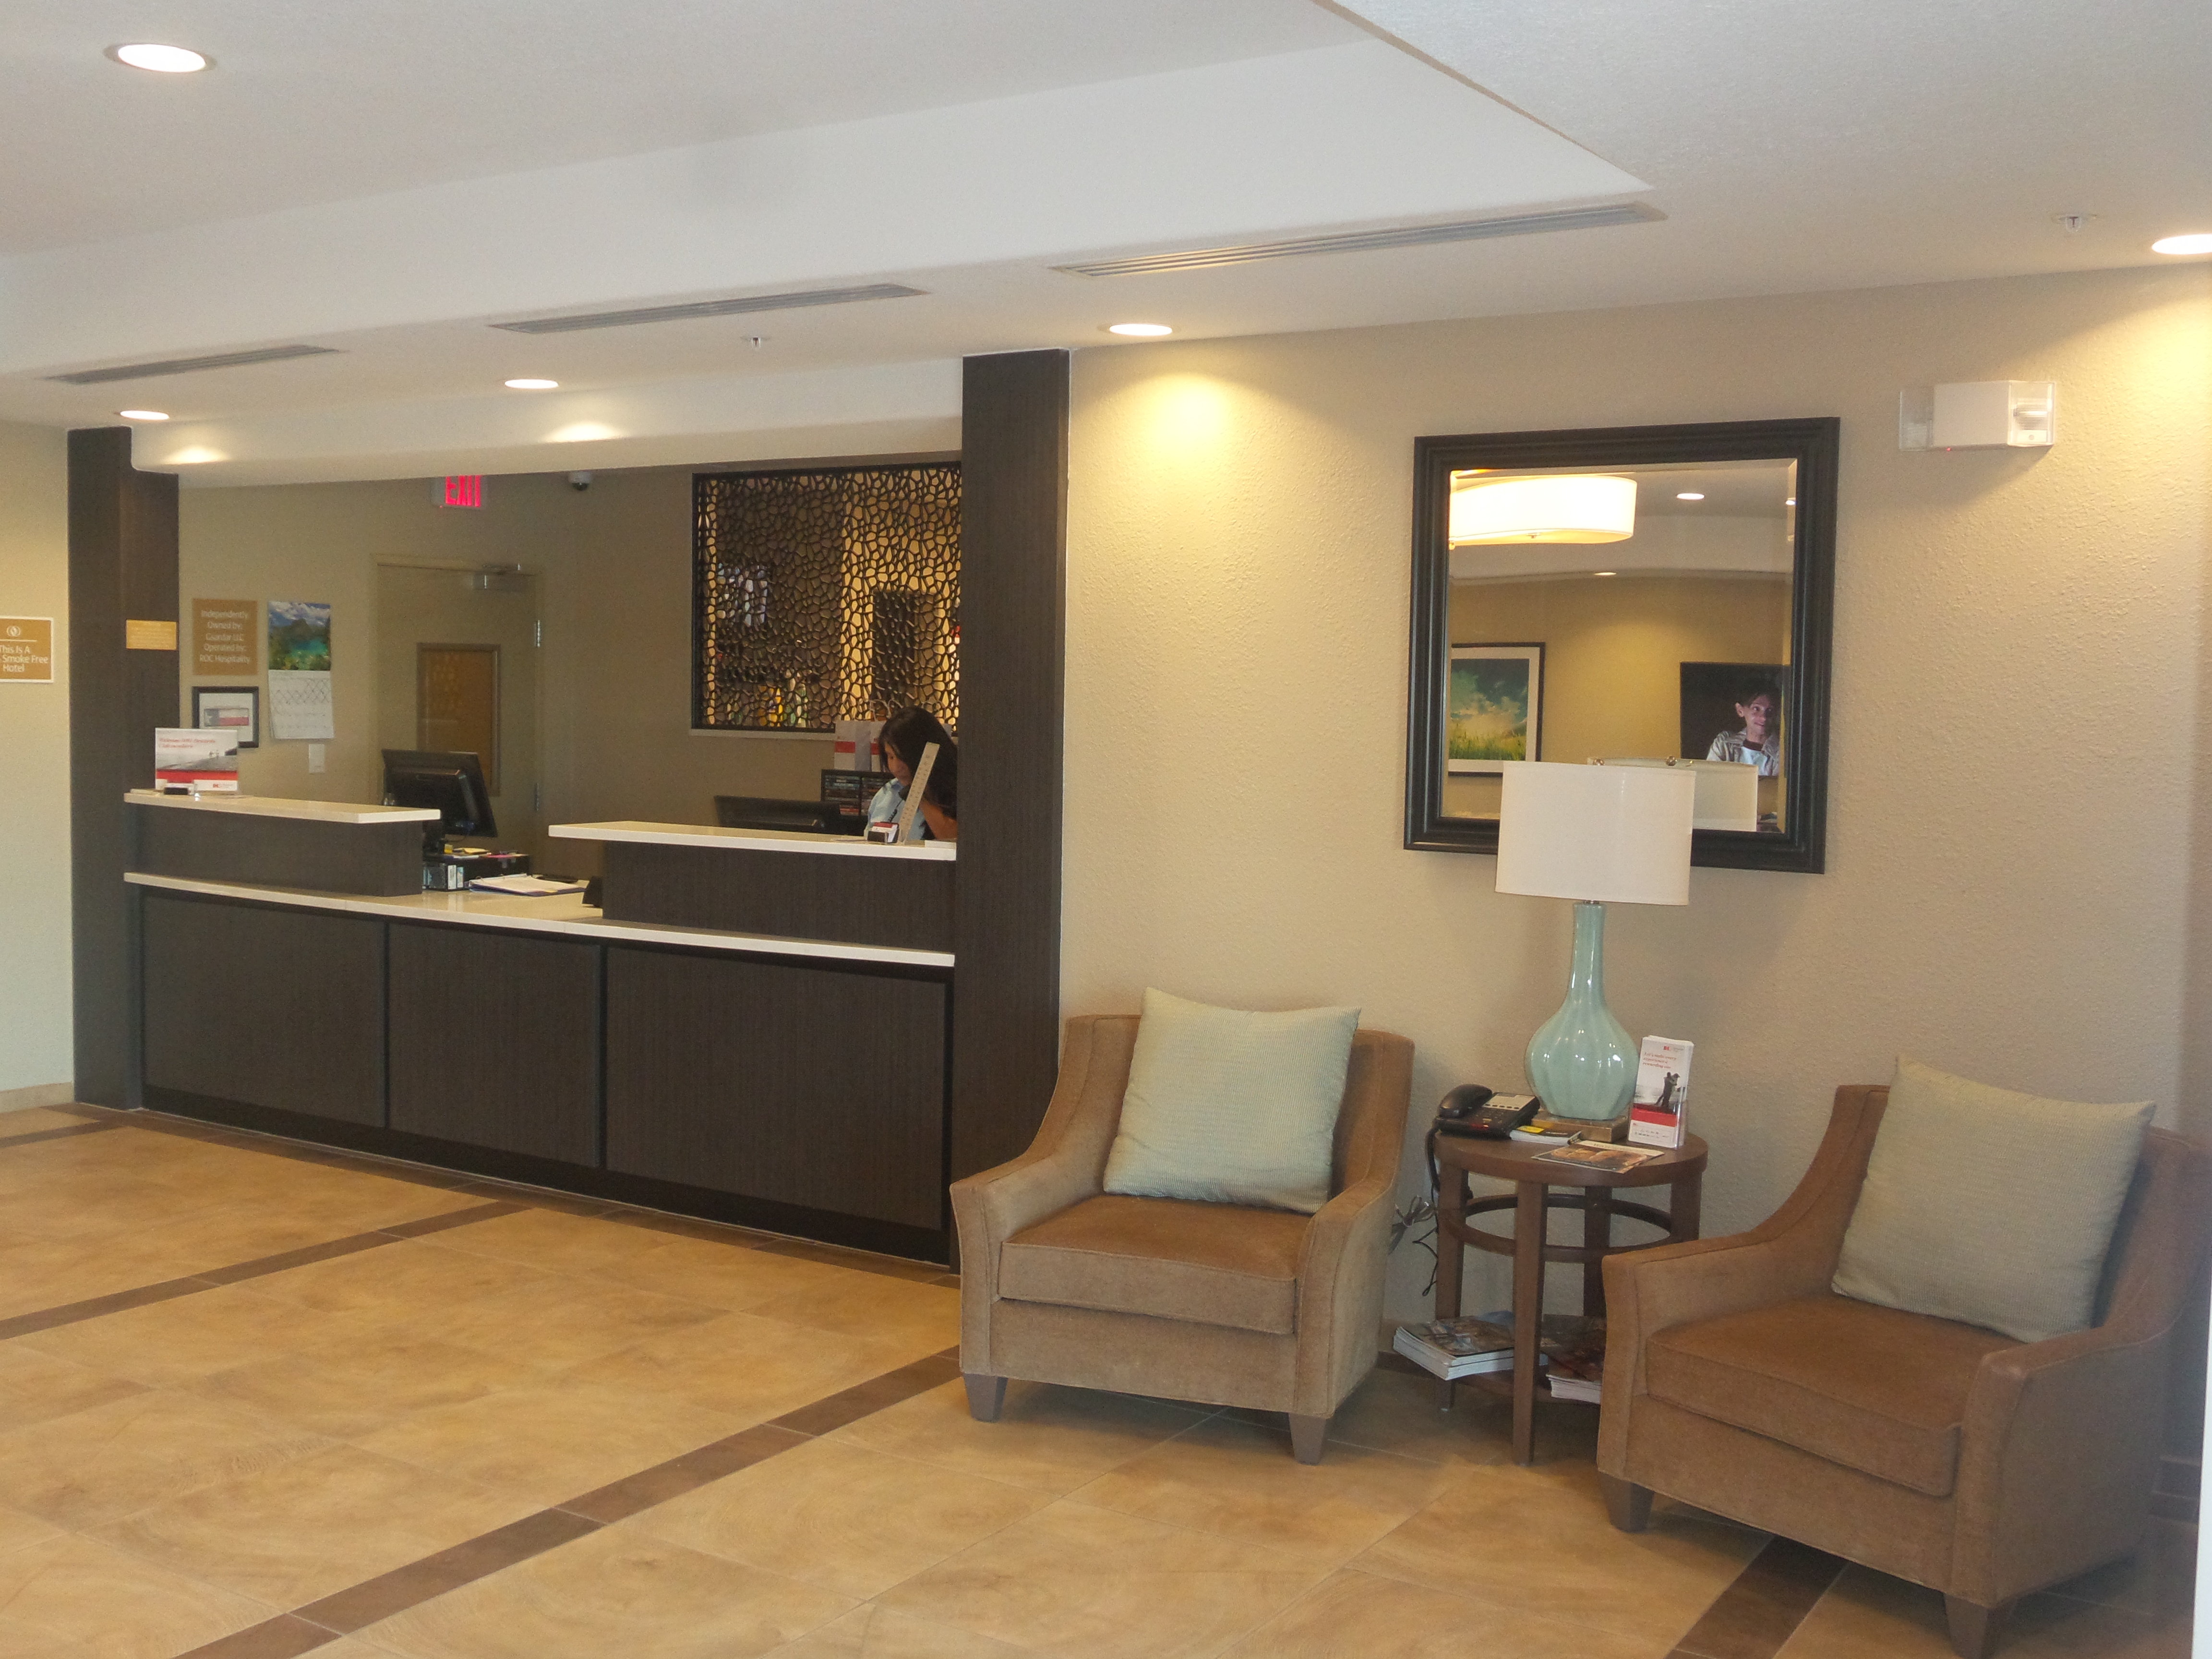 Friendly Staff, Excellent Stays at Candlewood Suites Cotulla